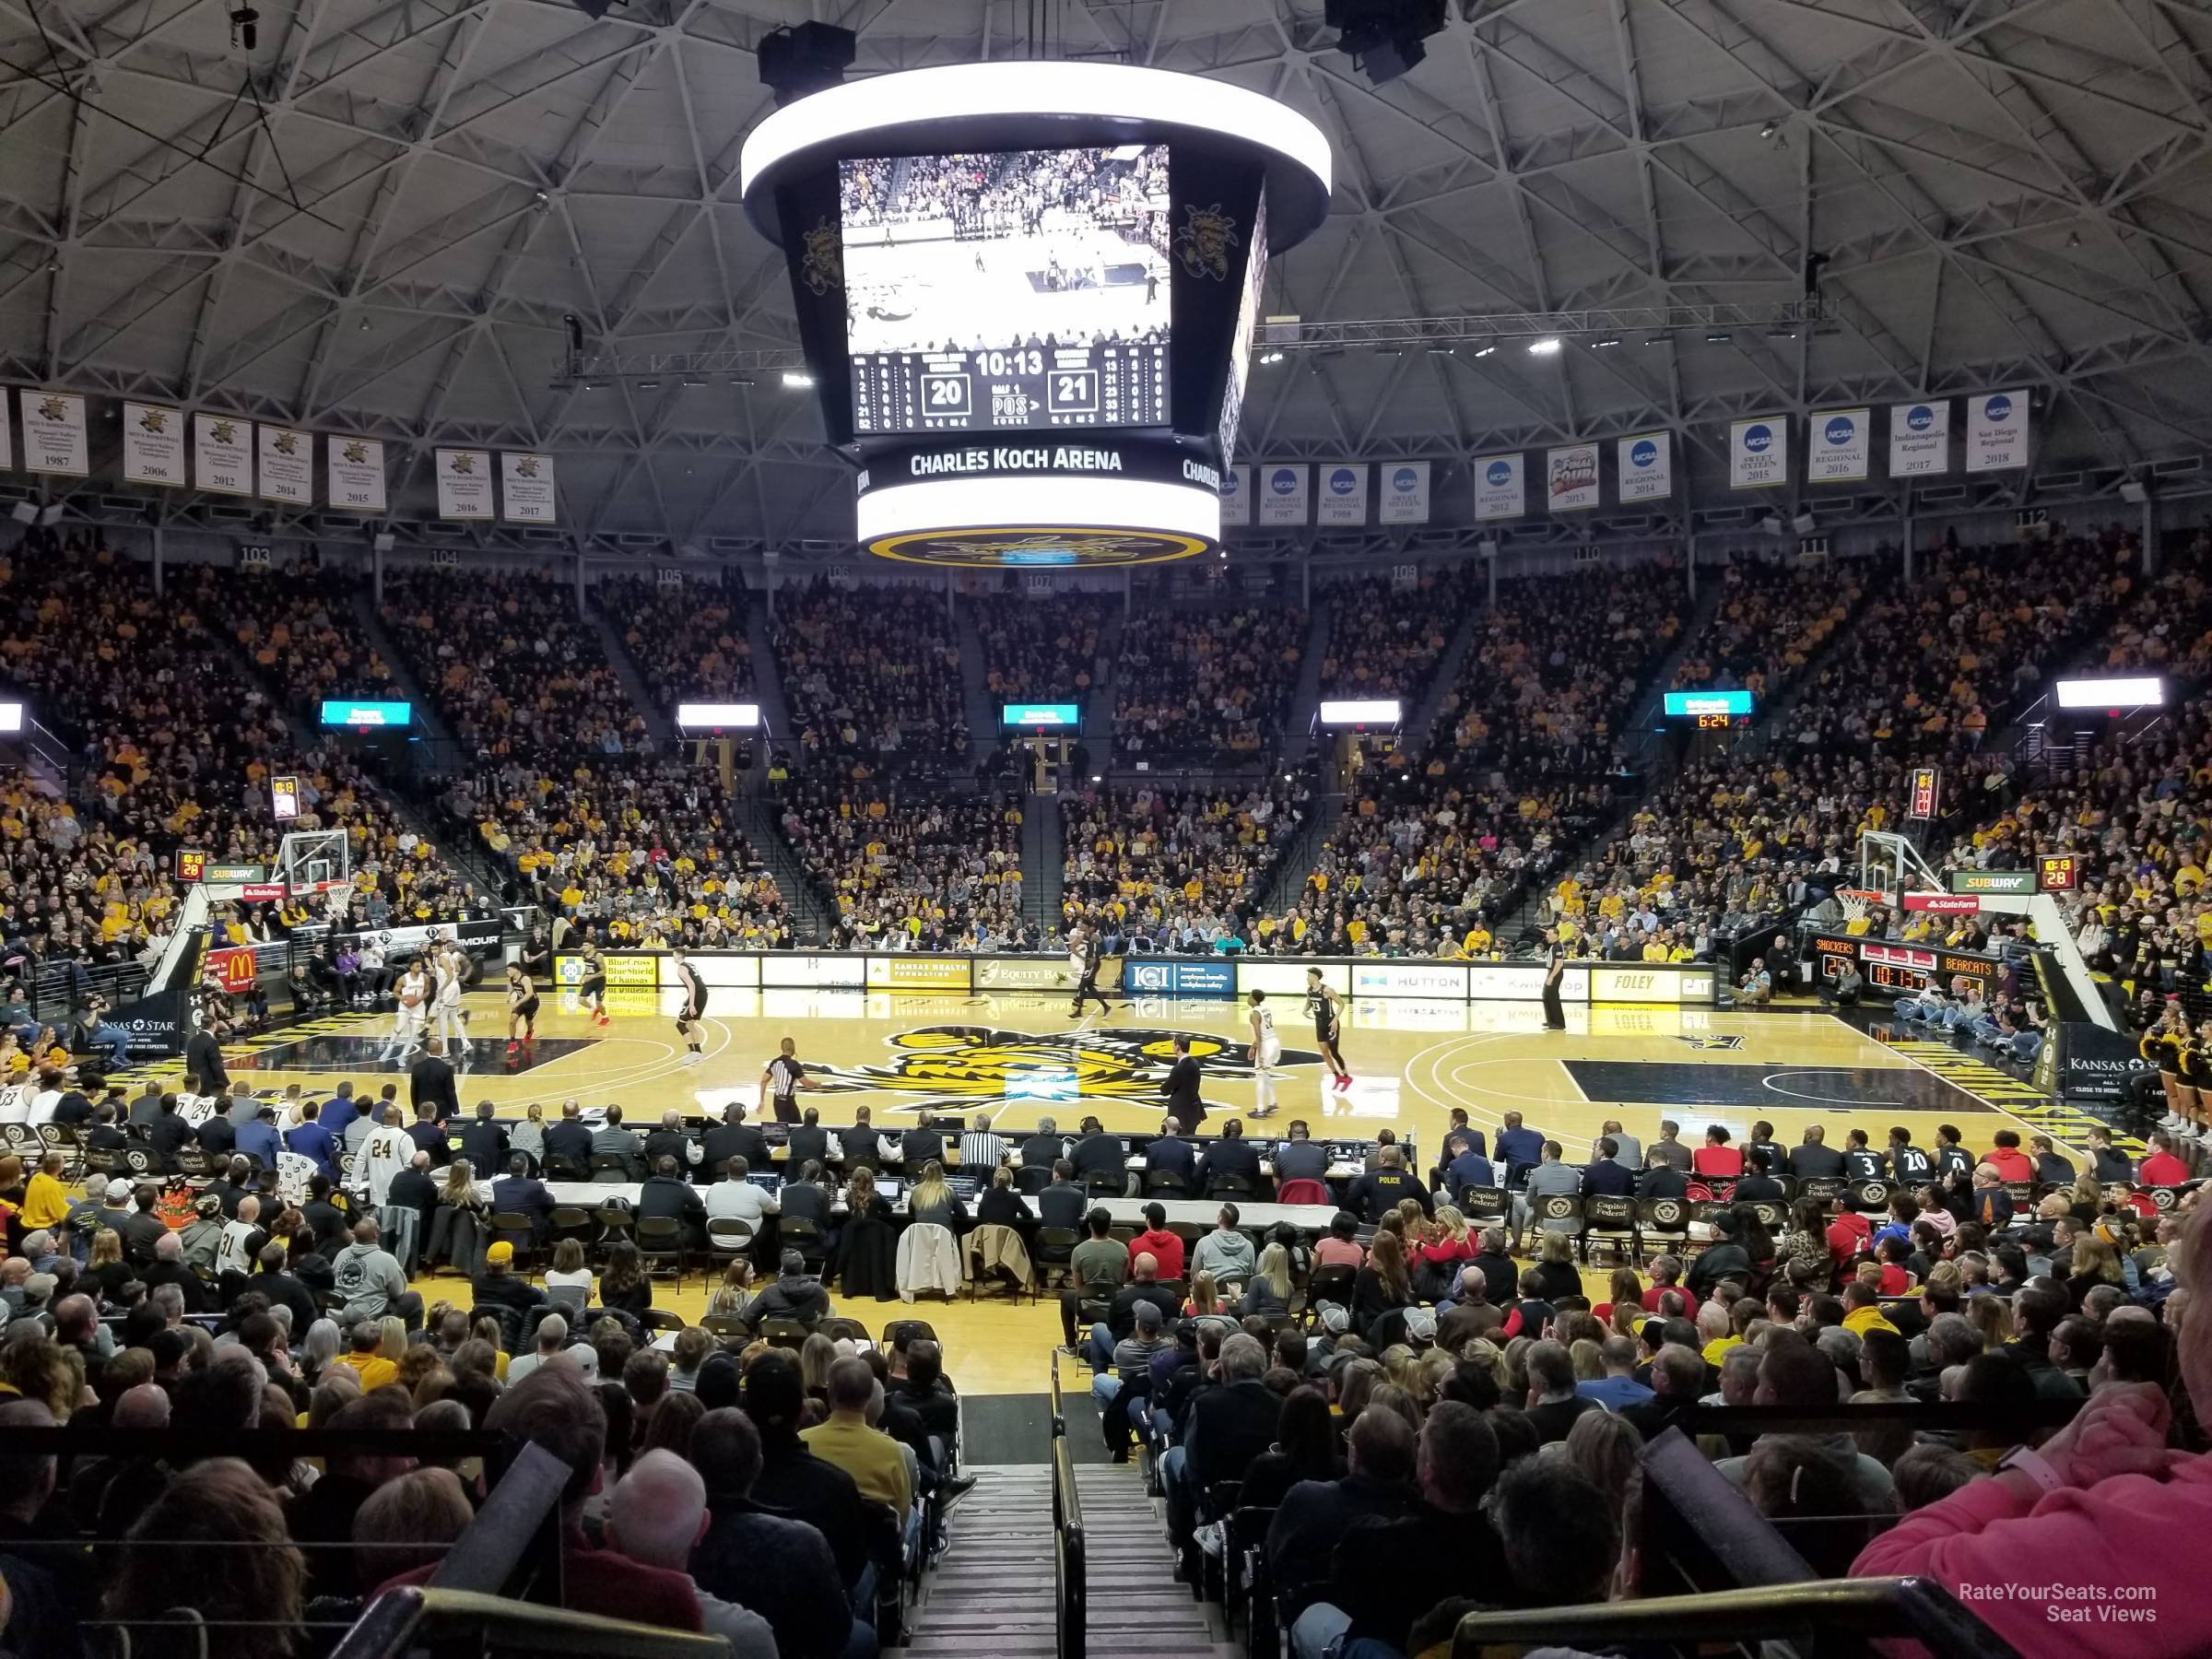 section 120, row 14 seat view  - charles koch arena